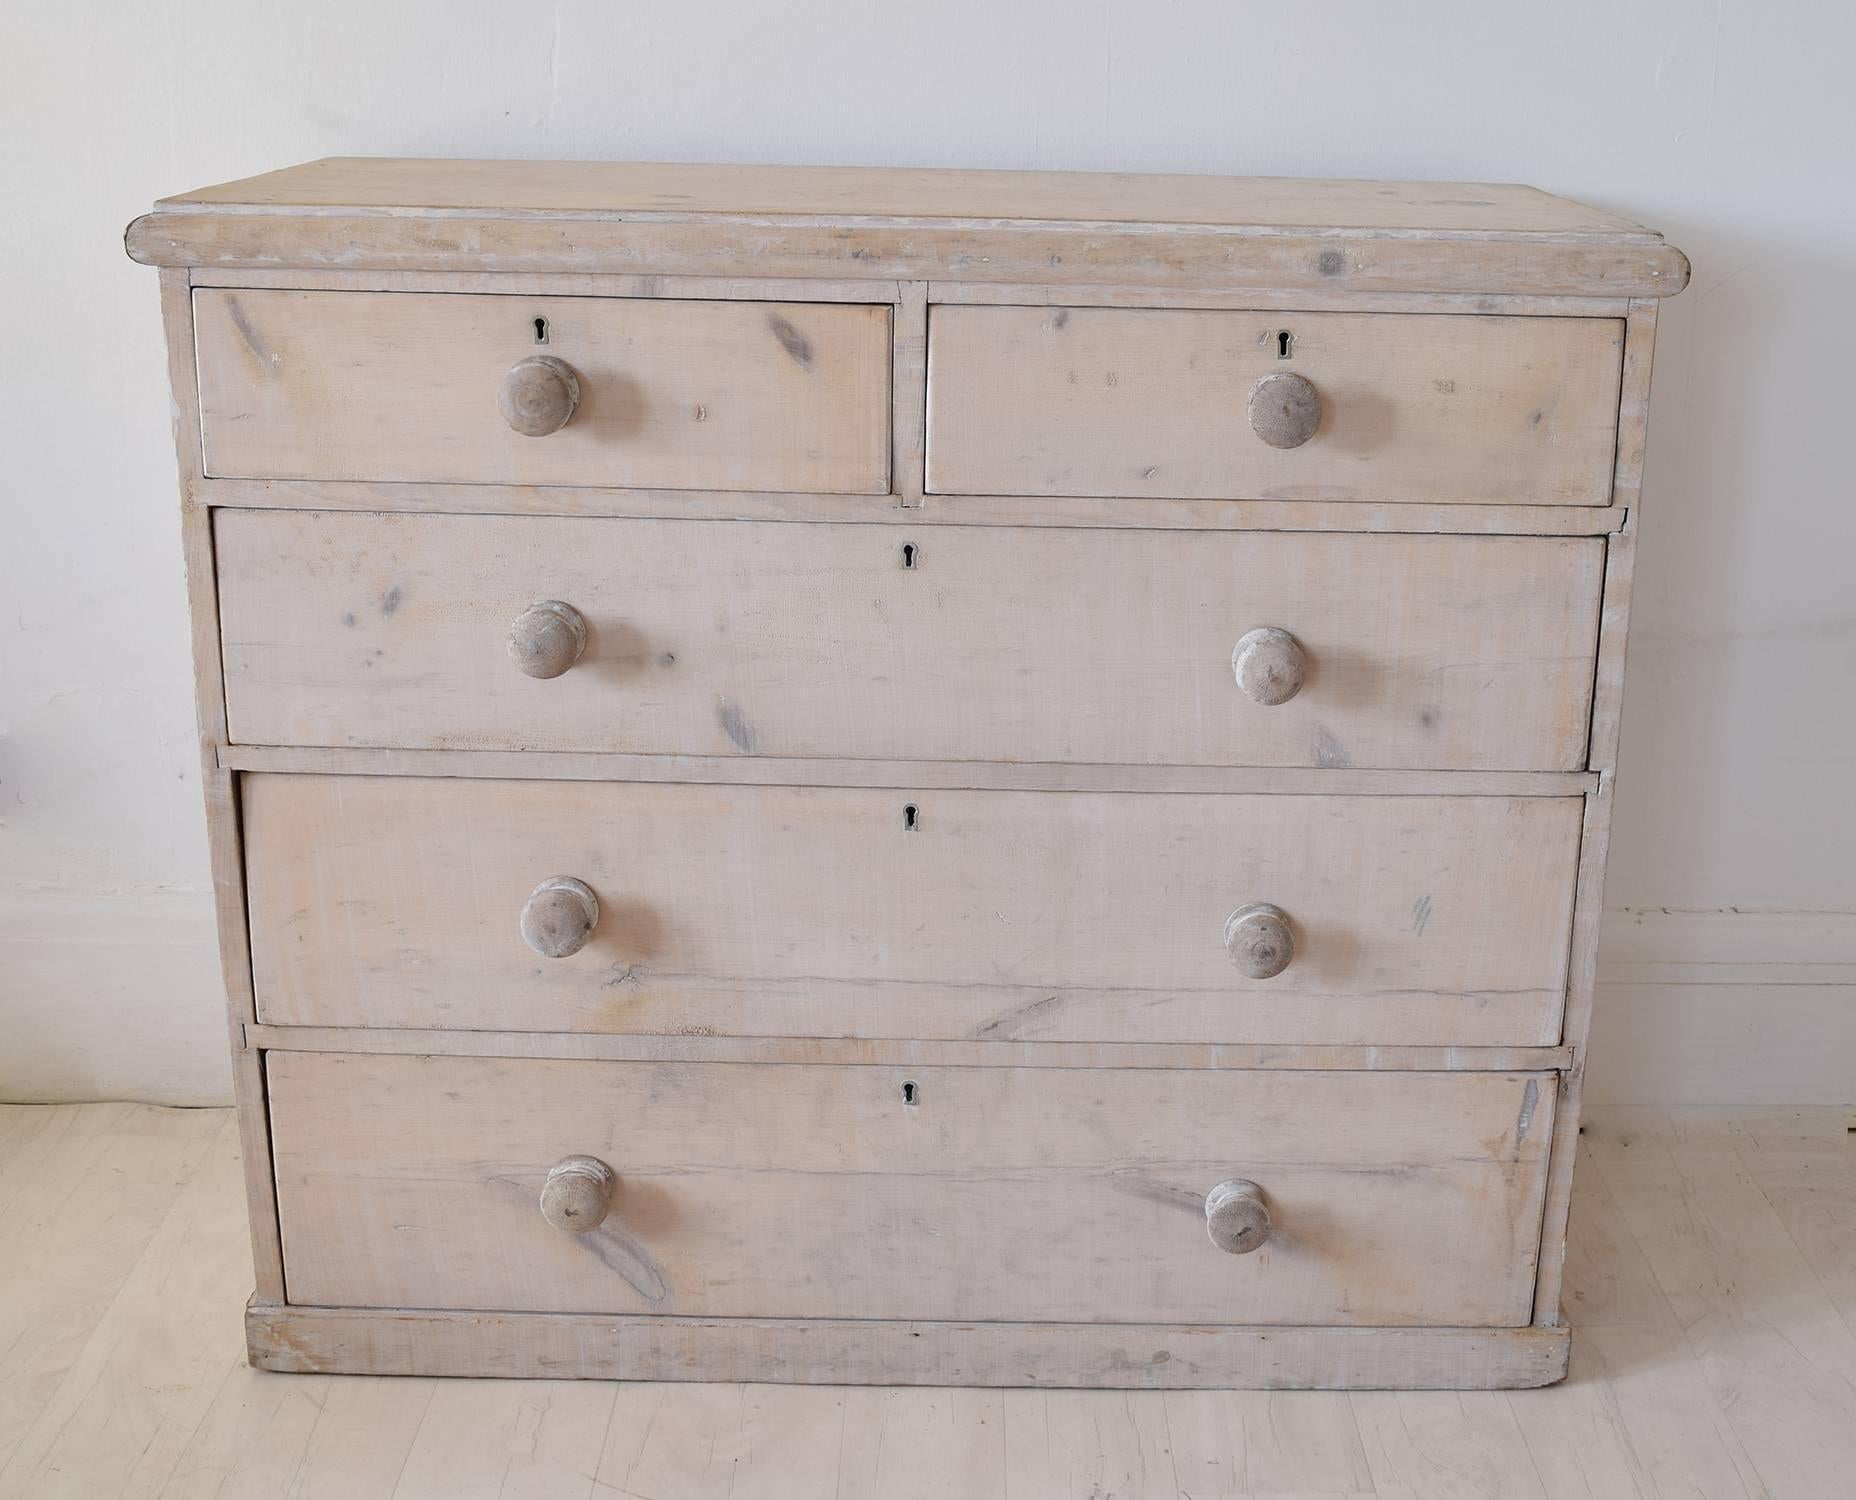 
Small pine chest that has been recently bleached and lime washed.

Although painted white there is a pale pink hue to it.

English, circa 1880.

Original turned knobs that have also been painted.

Perfect for a bedroom chest.